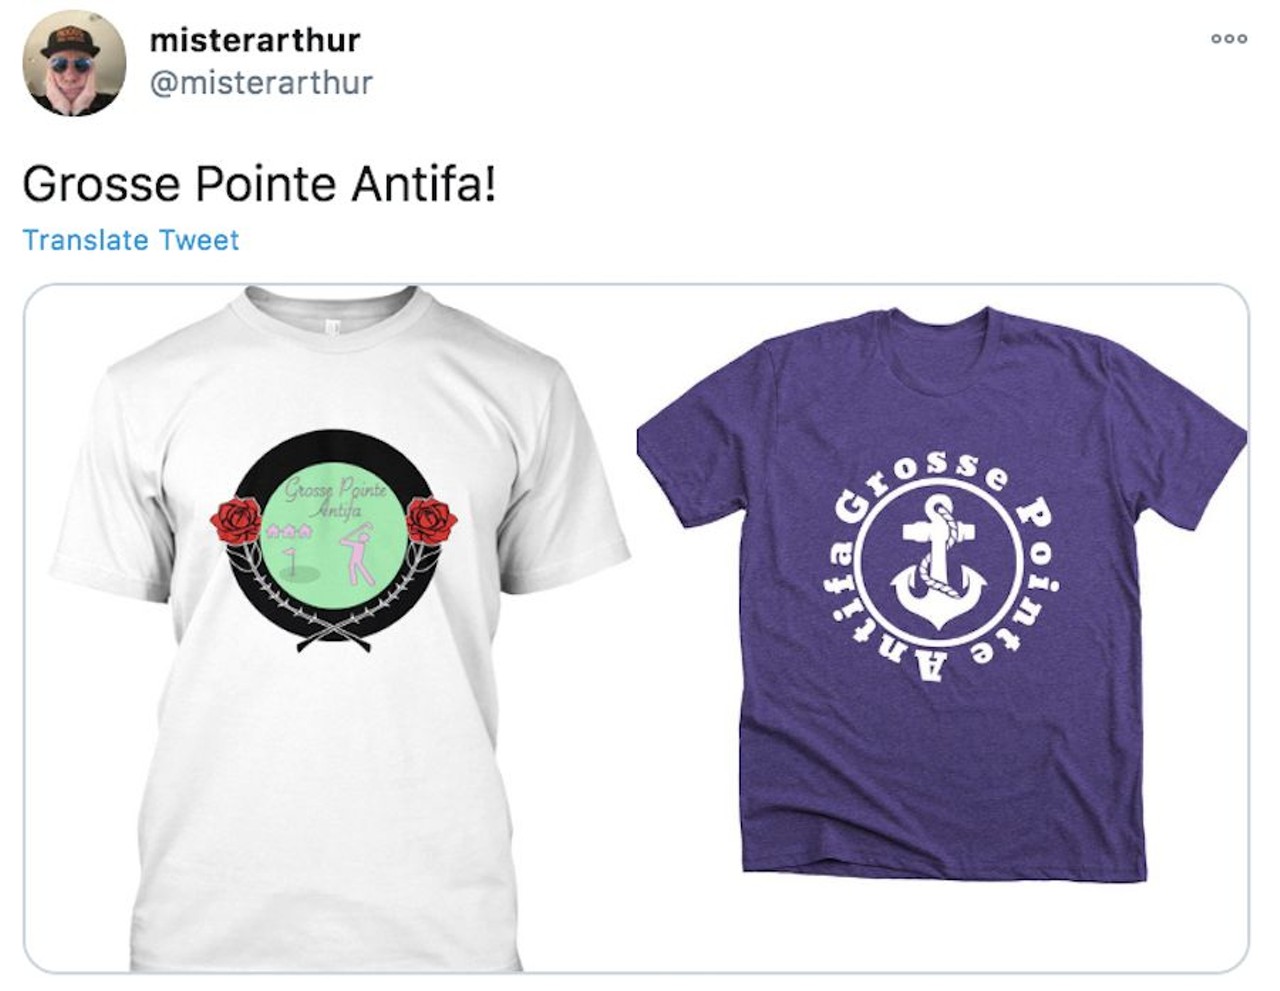 The best Twitter reactions to 'Grosse Pointe Antifa'